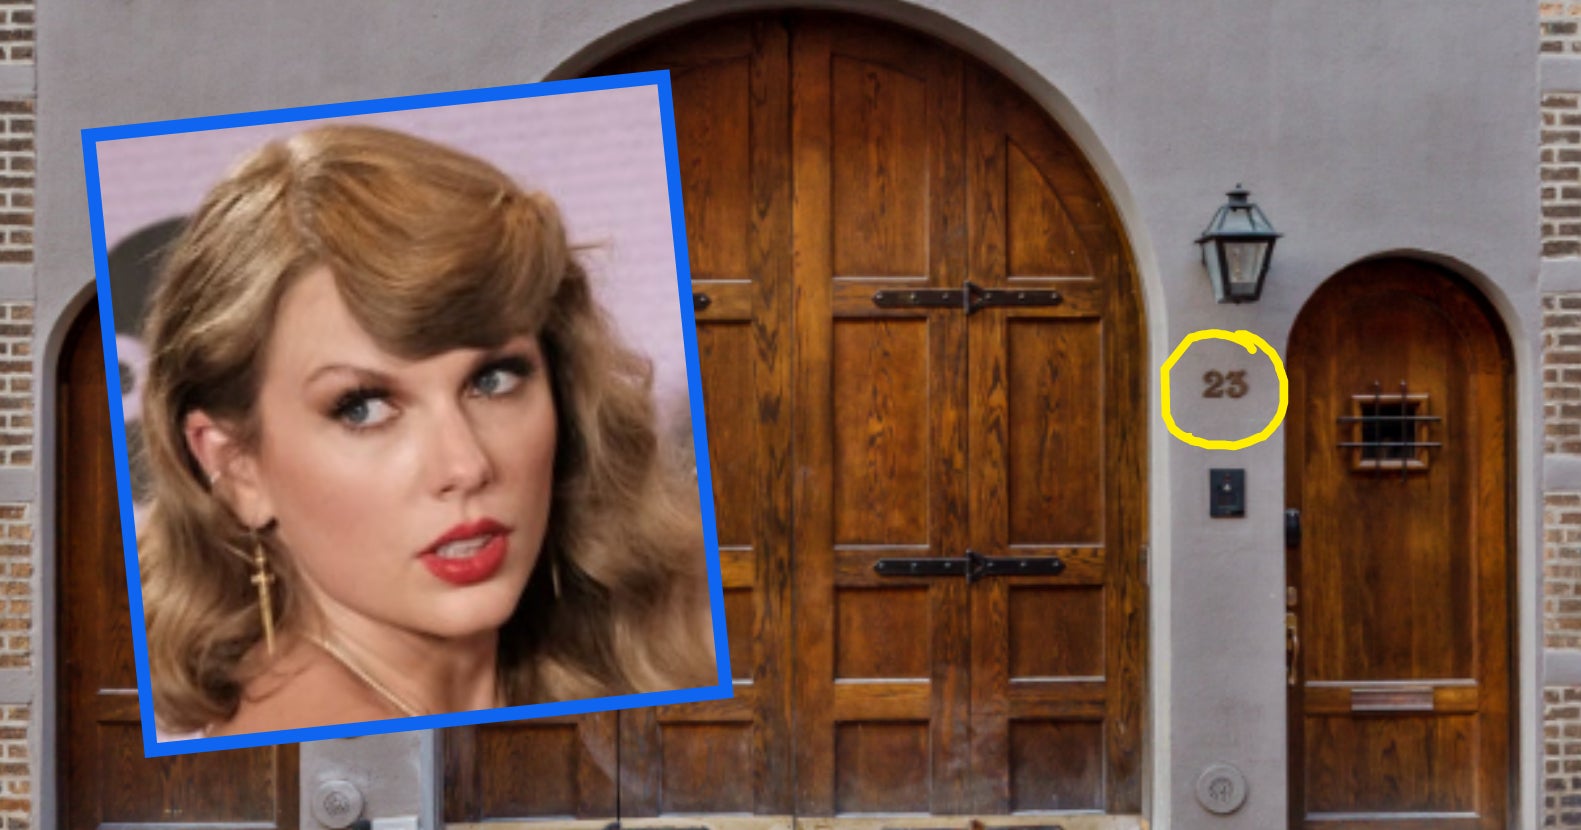 Taylor Swift’s Former “Cornelia Street” NYC Home Is On The Market, And The Inside Is Not At All What I Expected